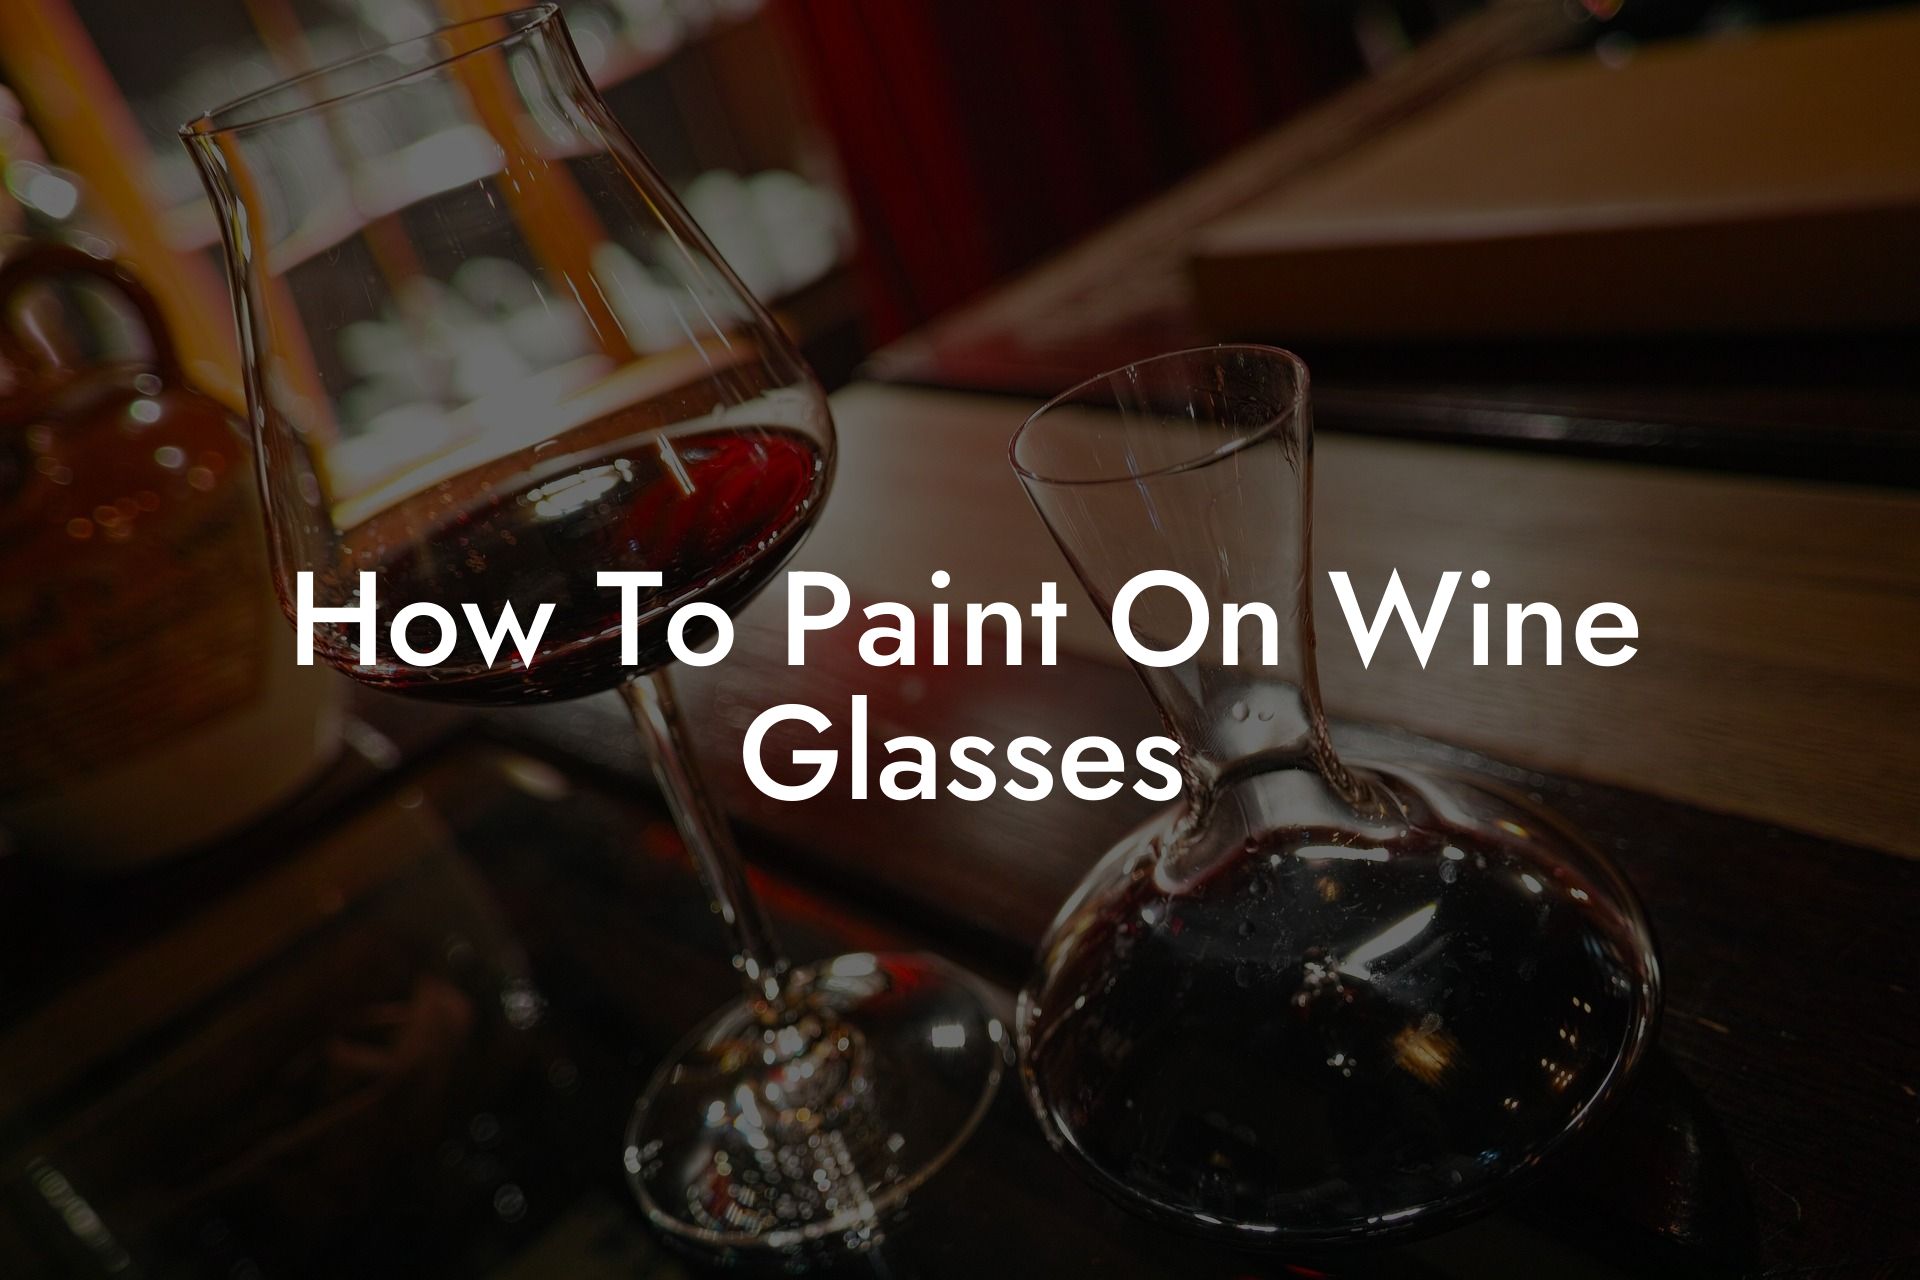 How To Paint On Wine Glasses